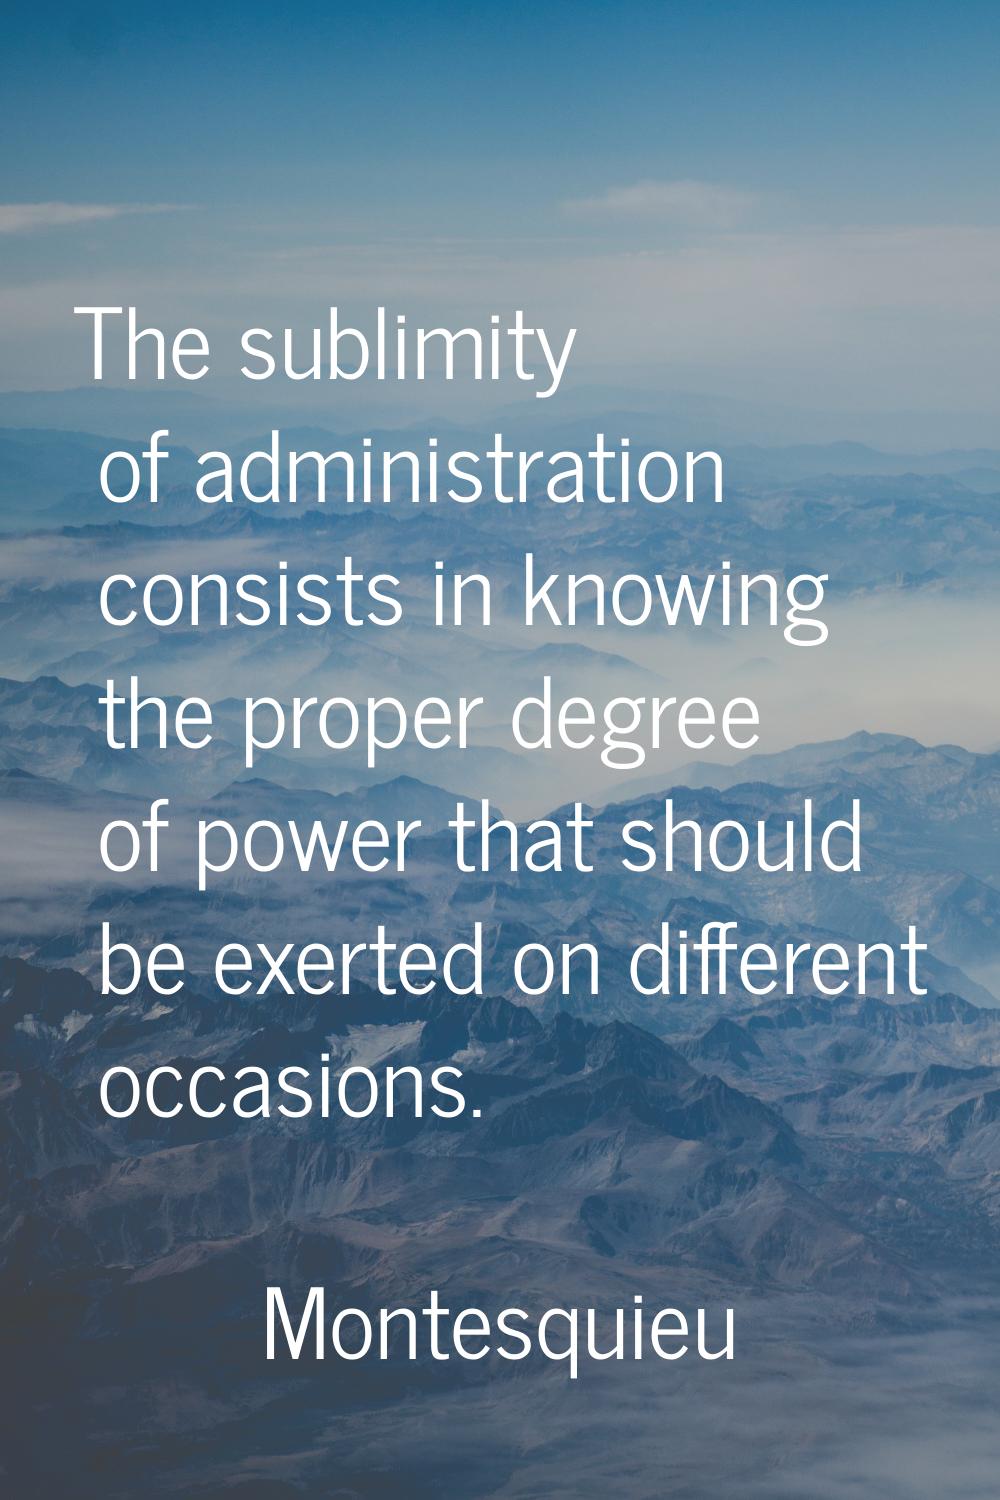 The sublimity of administration consists in knowing the proper degree of power that should be exert